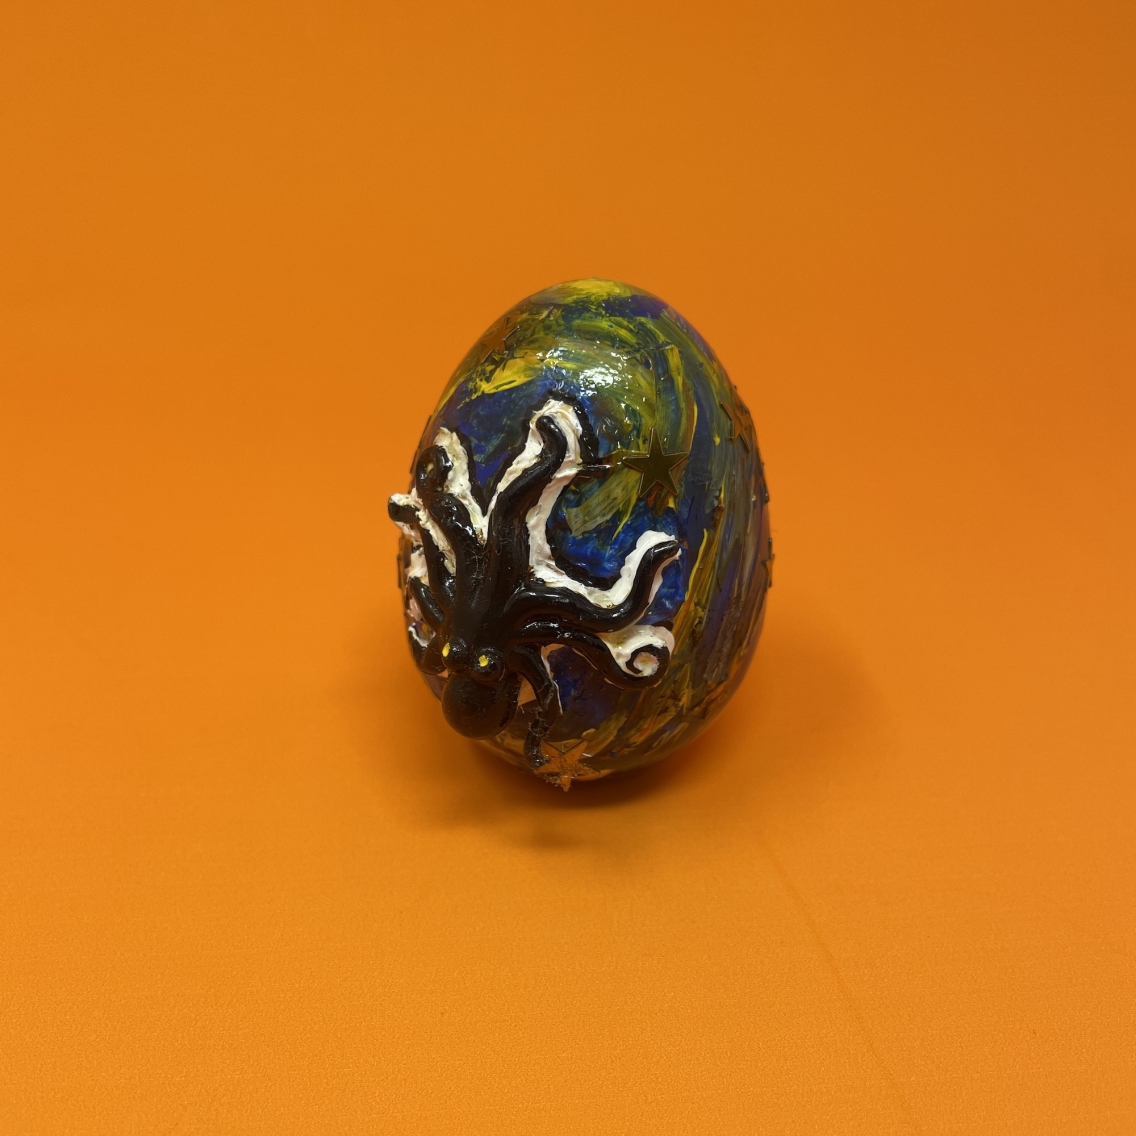 Painted egg with black octopus outlined in white against orange background